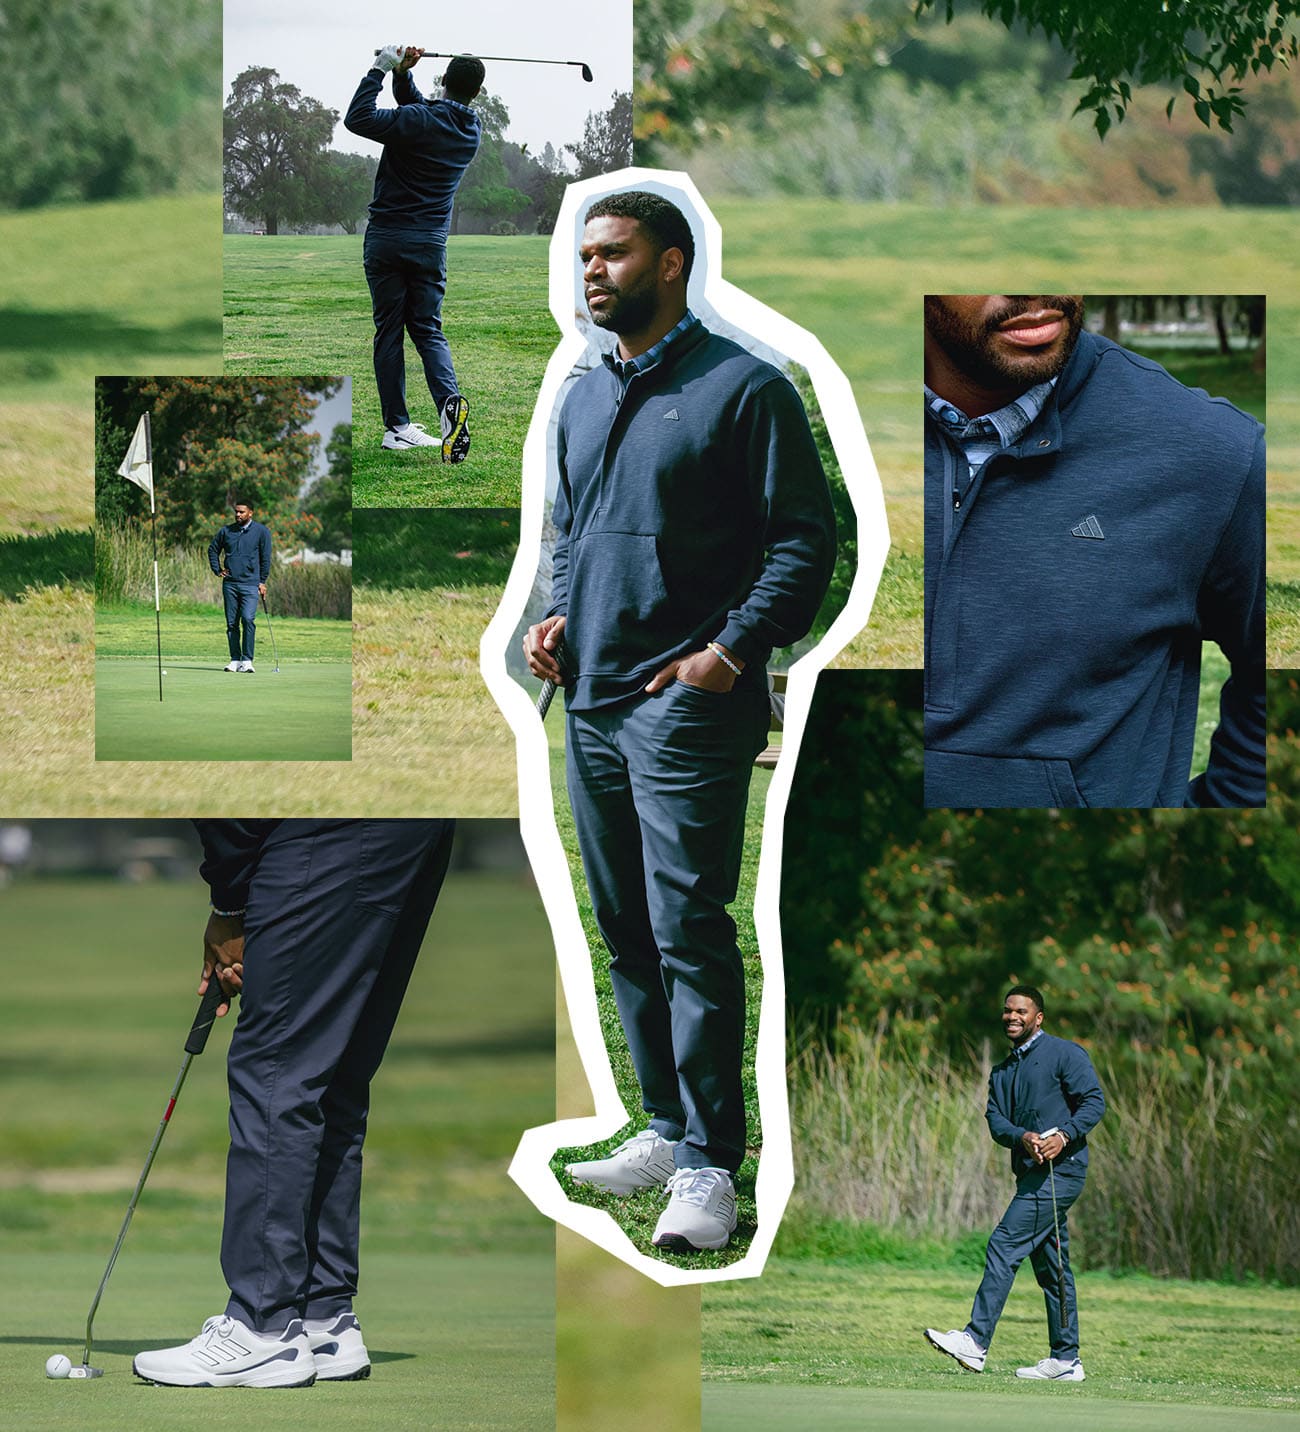 Men's golf outfits: 3 stylish options to wear on the course this